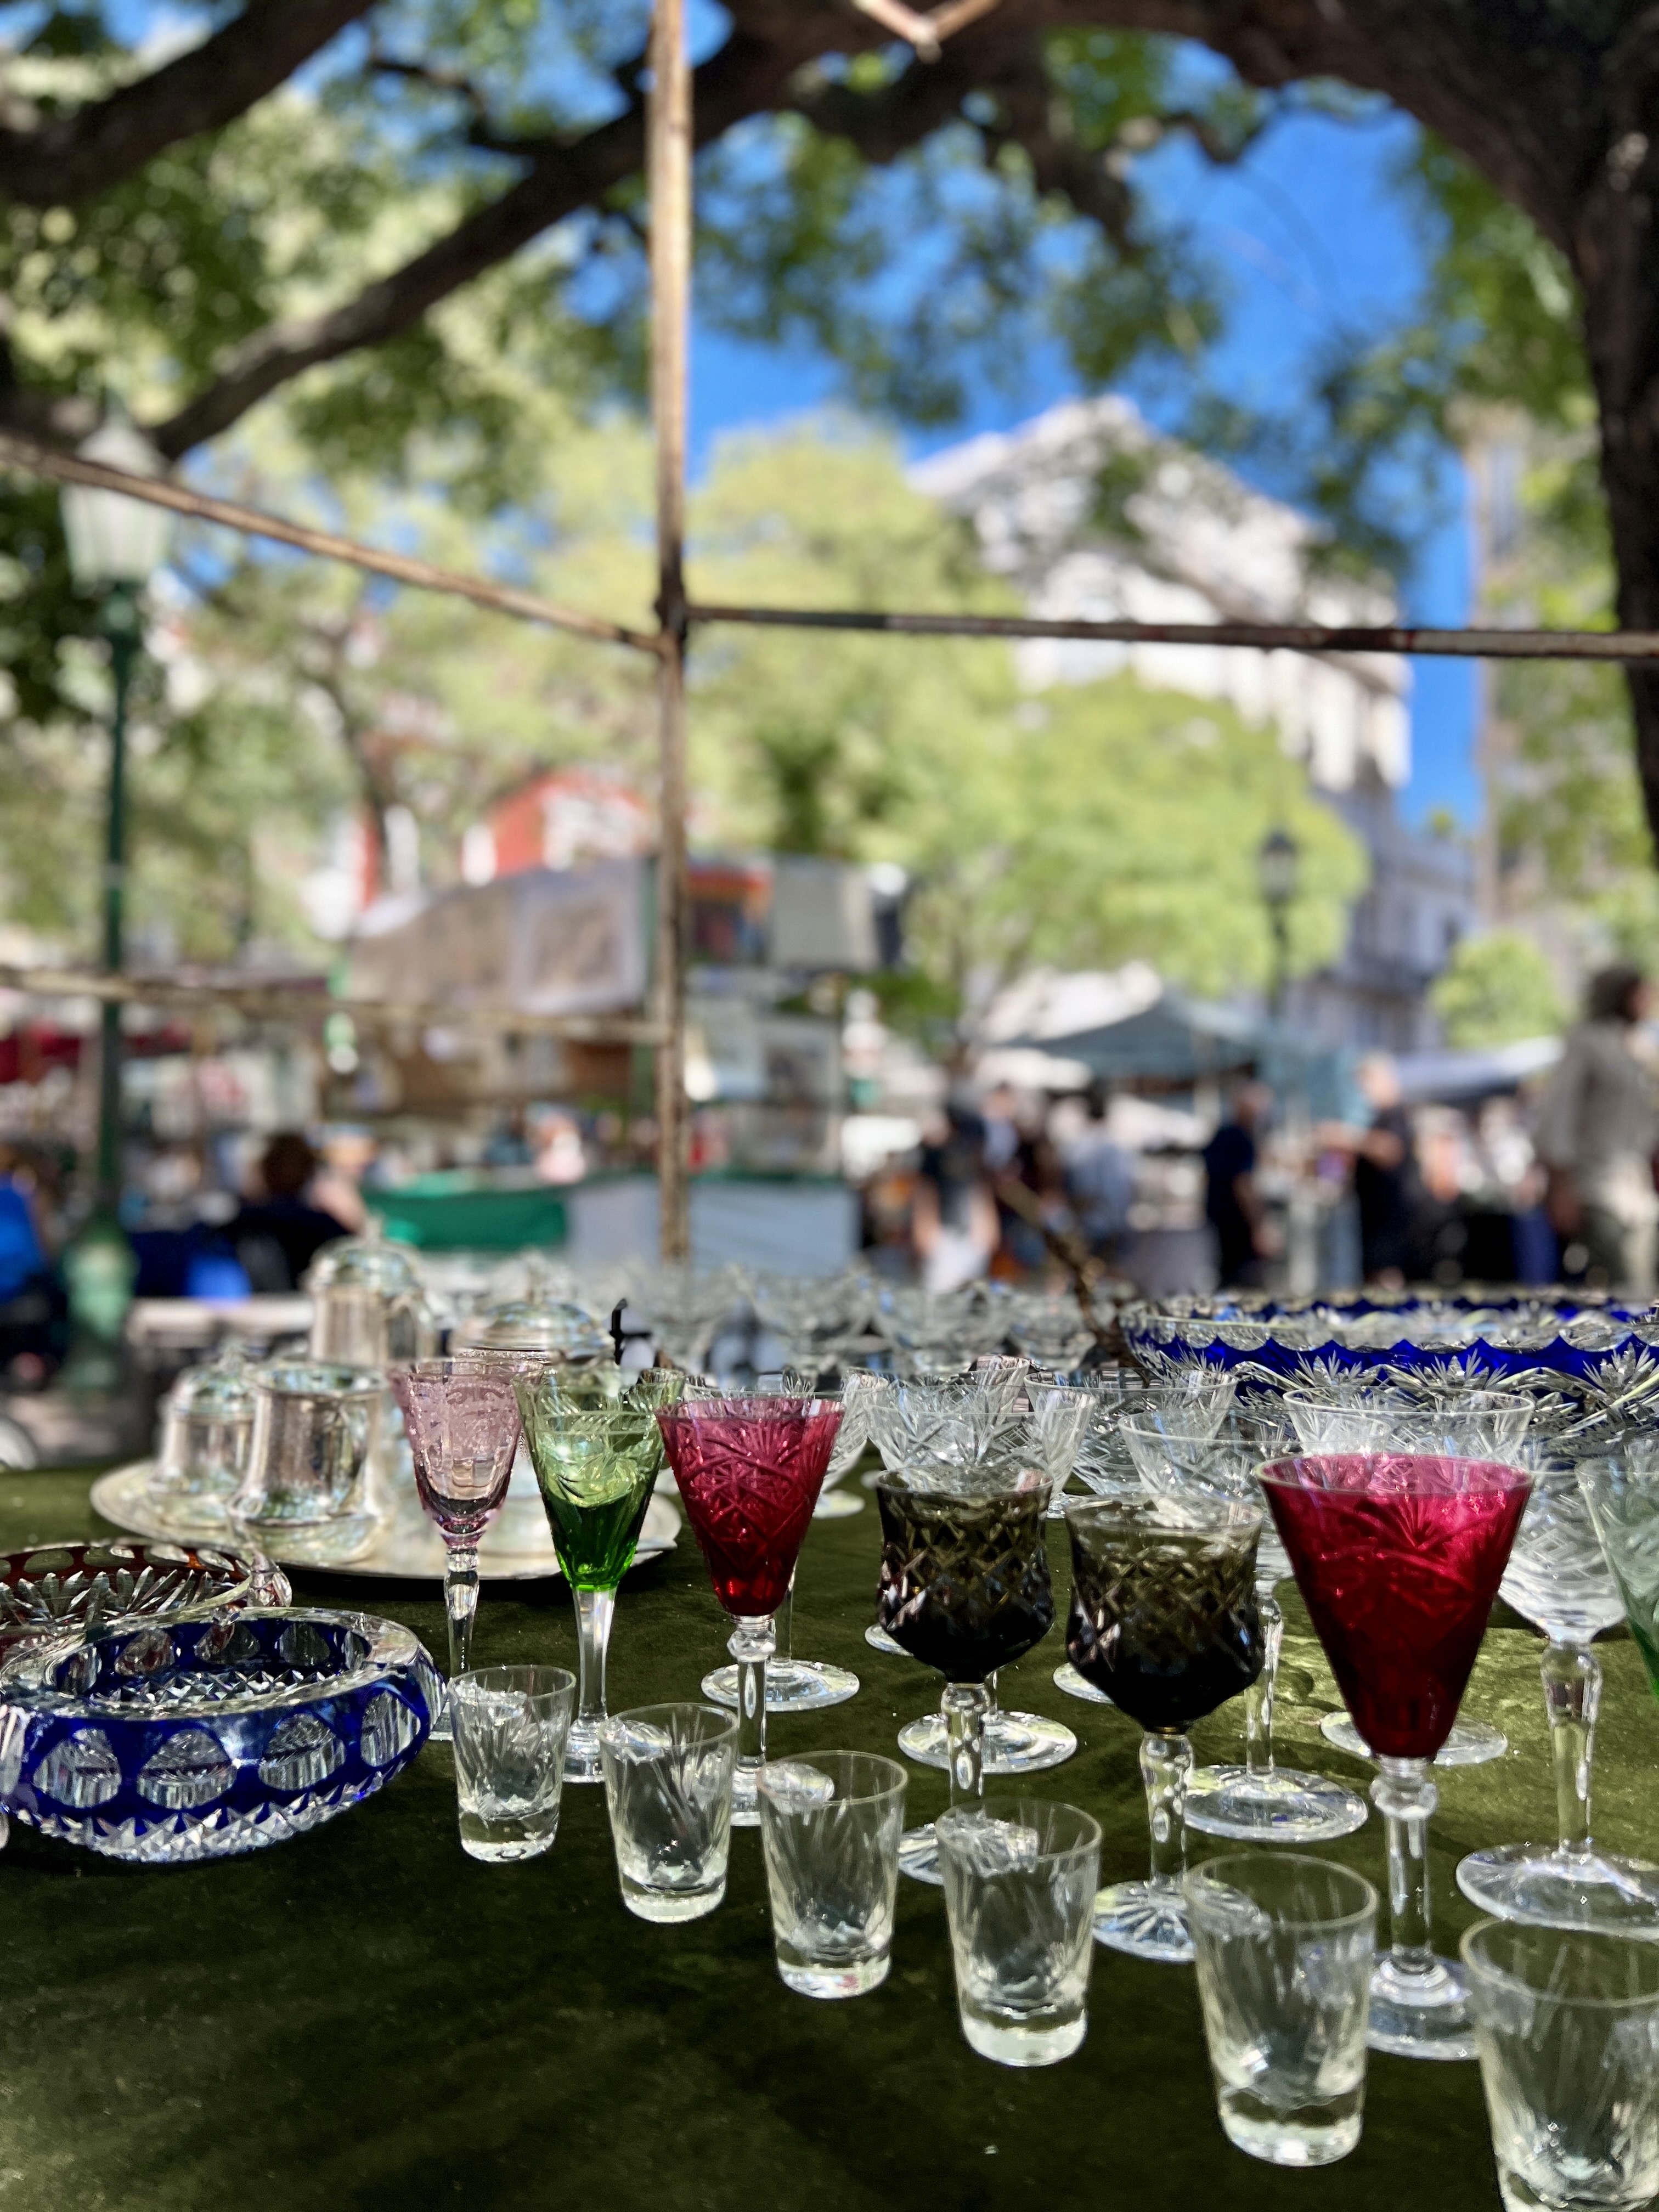 Several antique glasses are displayed on a table at the San Telmo Market in Buenos Aires